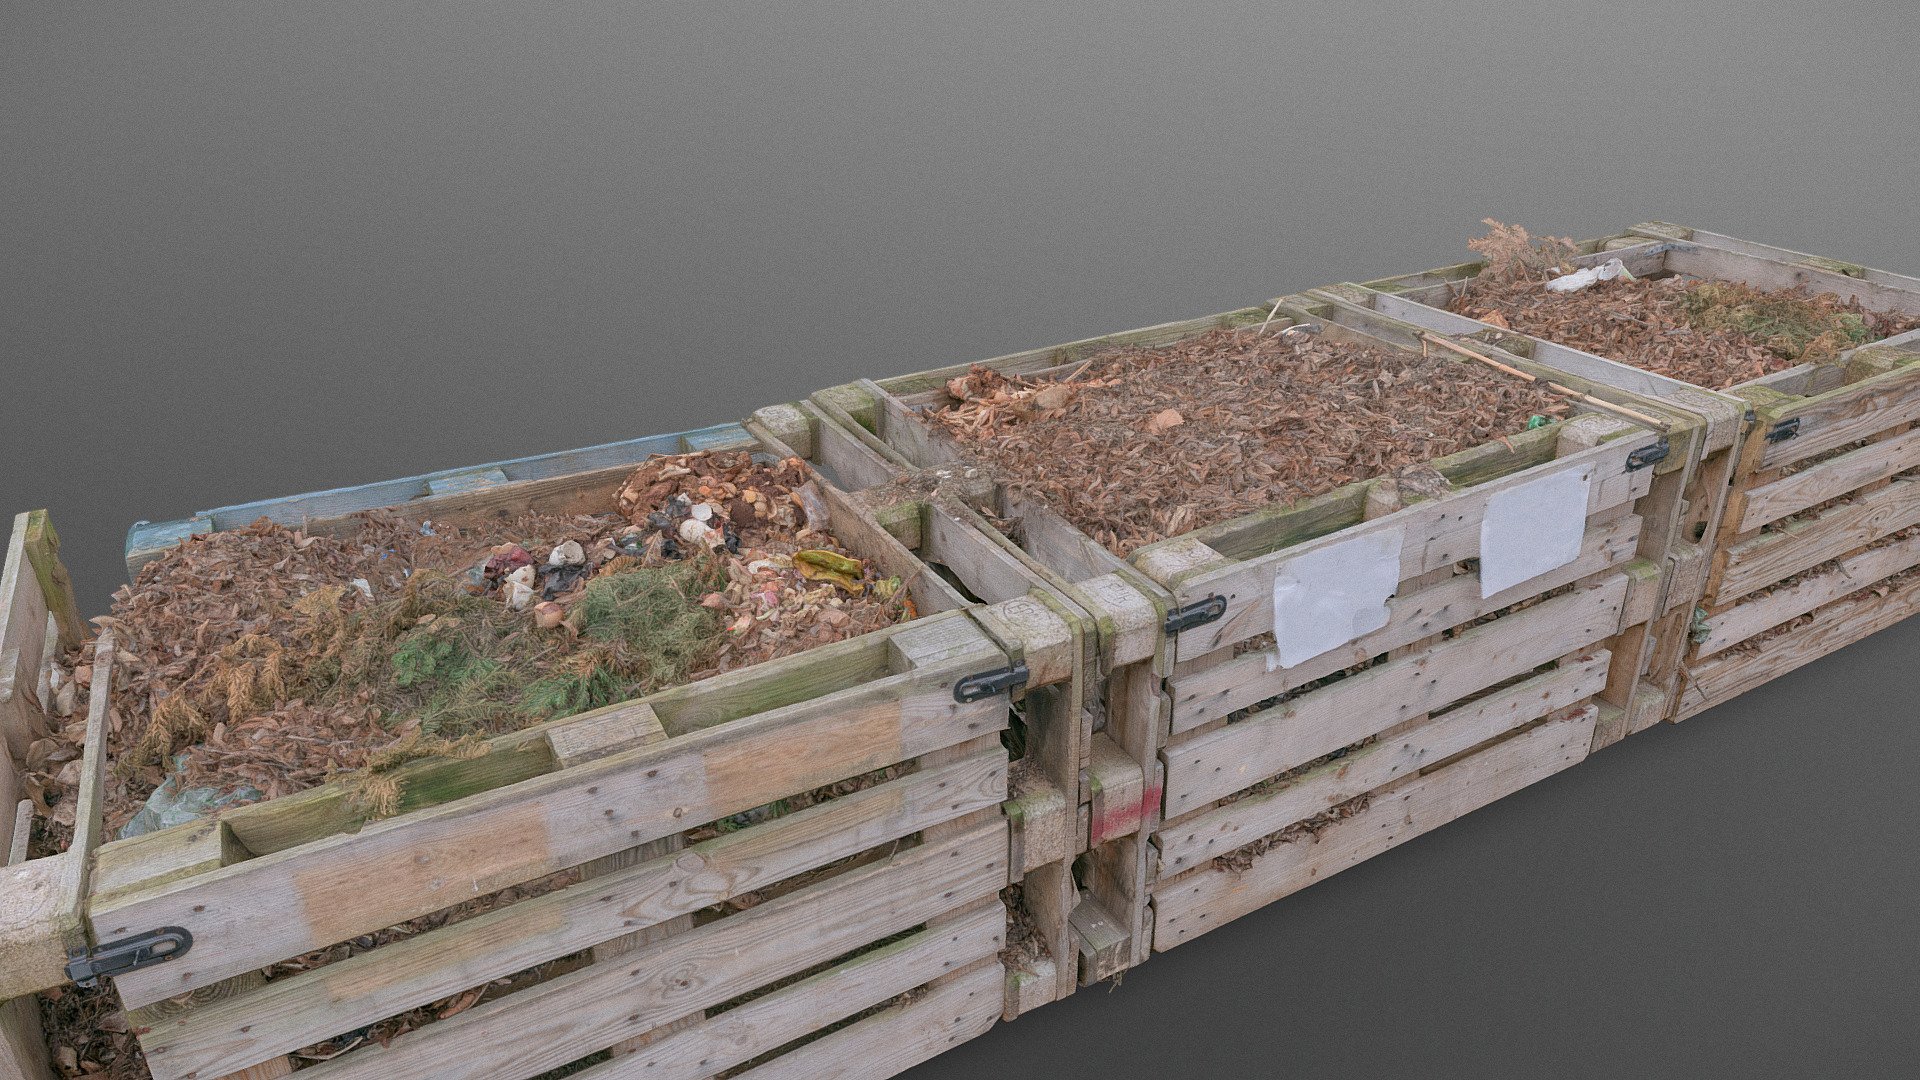 Organic waste composter compost bins made of wooden freight cargo shipping pallets pallet with some painted decor

Composting is the gardener’s way of recycling old plant material into rich, soil-nourishing compost.
Wooden pallets are often free to source and are the perfect size for making a large compost bin.

Use my other models to add more fresh dumped waste
https://sketchfab.com/3d-models/organic-composter-waste-87bde8f2a0854d2c8e82447e7318438a

https://sketchfab.com/3d-models/hay-fruit-composter-e991901484e94b7d9e51365ab9861f94

photogrammetry scan (36MP x 250 photos, 4x8K texture + HD normals) - Pallet Compost bin painted - Buy Royalty Free 3D model by matousekfoto 3d model